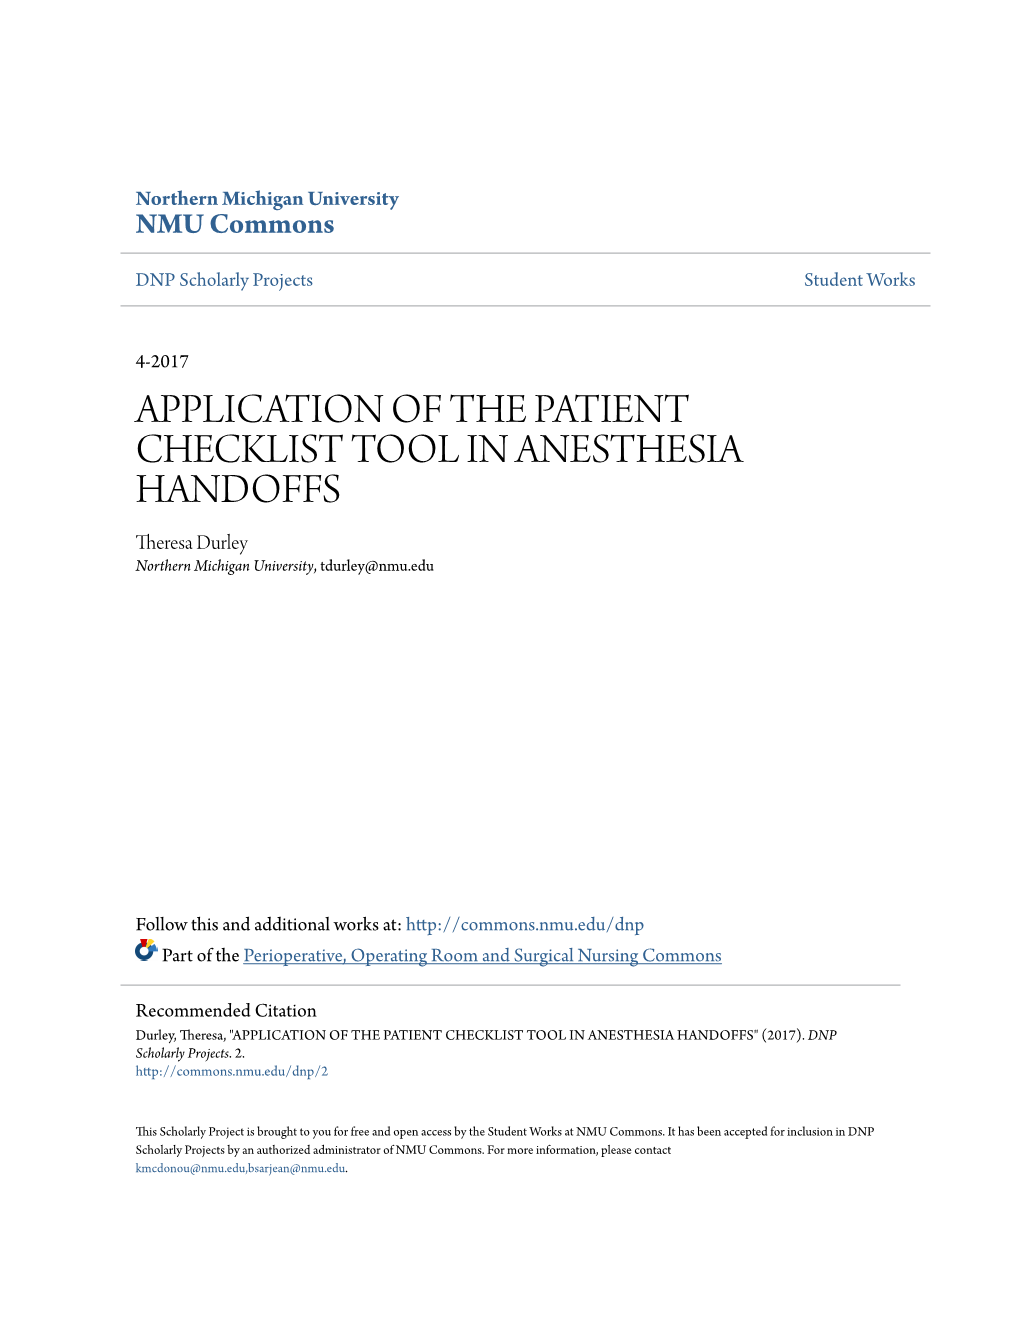 APPLICATION of the PATIENT CHECKLIST TOOL in ANESTHESIA HANDOFFS Theresa Durley Northern Michigan University, Tdurley@Nmu.Edu